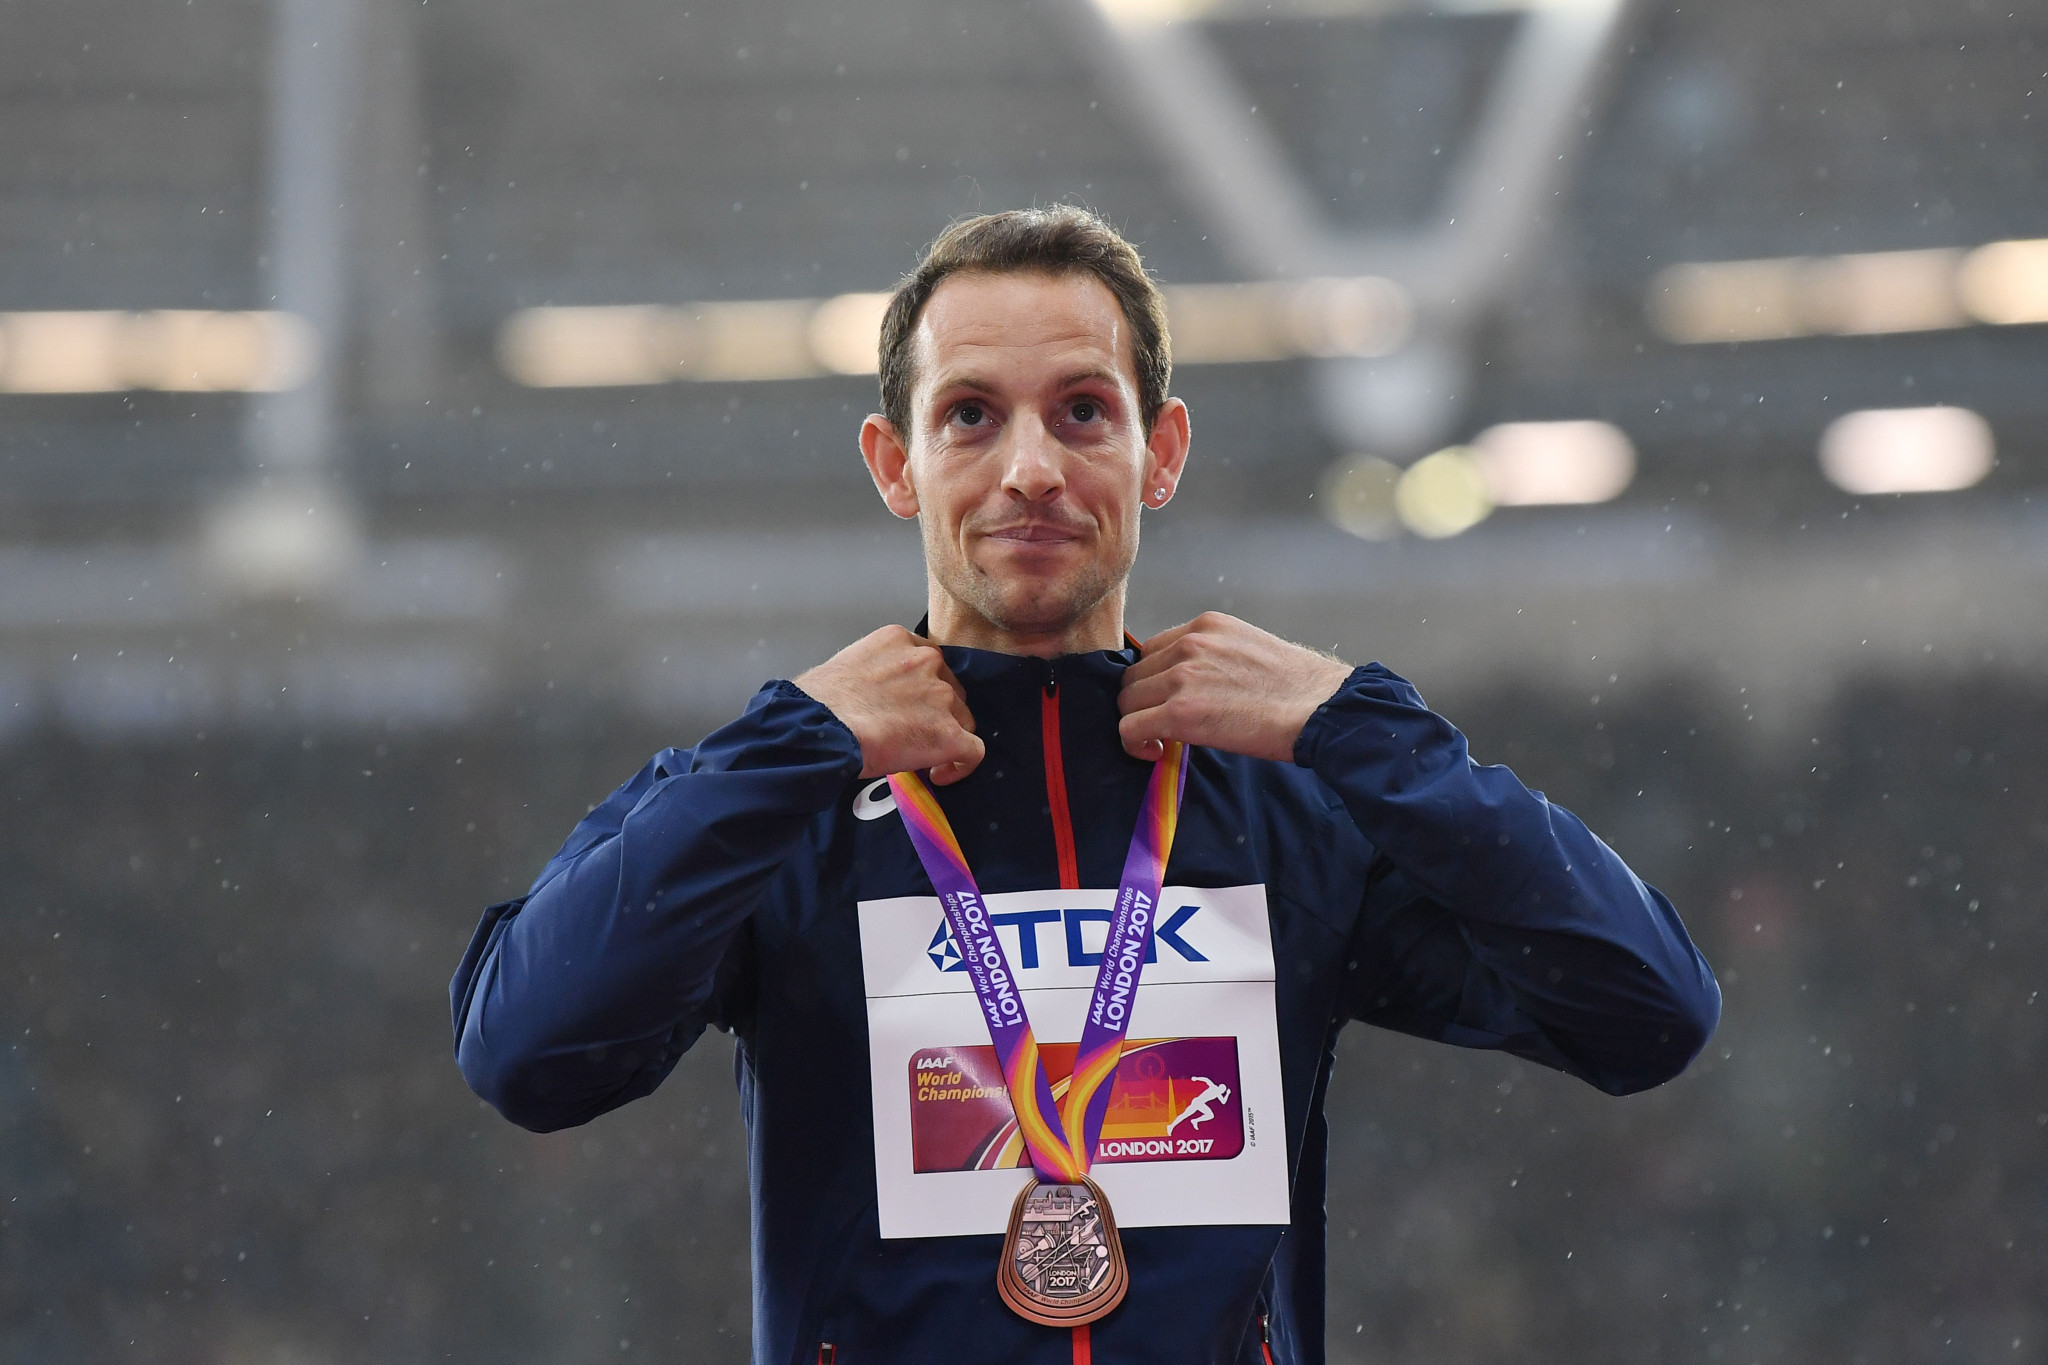 Lavillenie, Guyart and Le Fur among top athletes to help launch Paris 2024 project